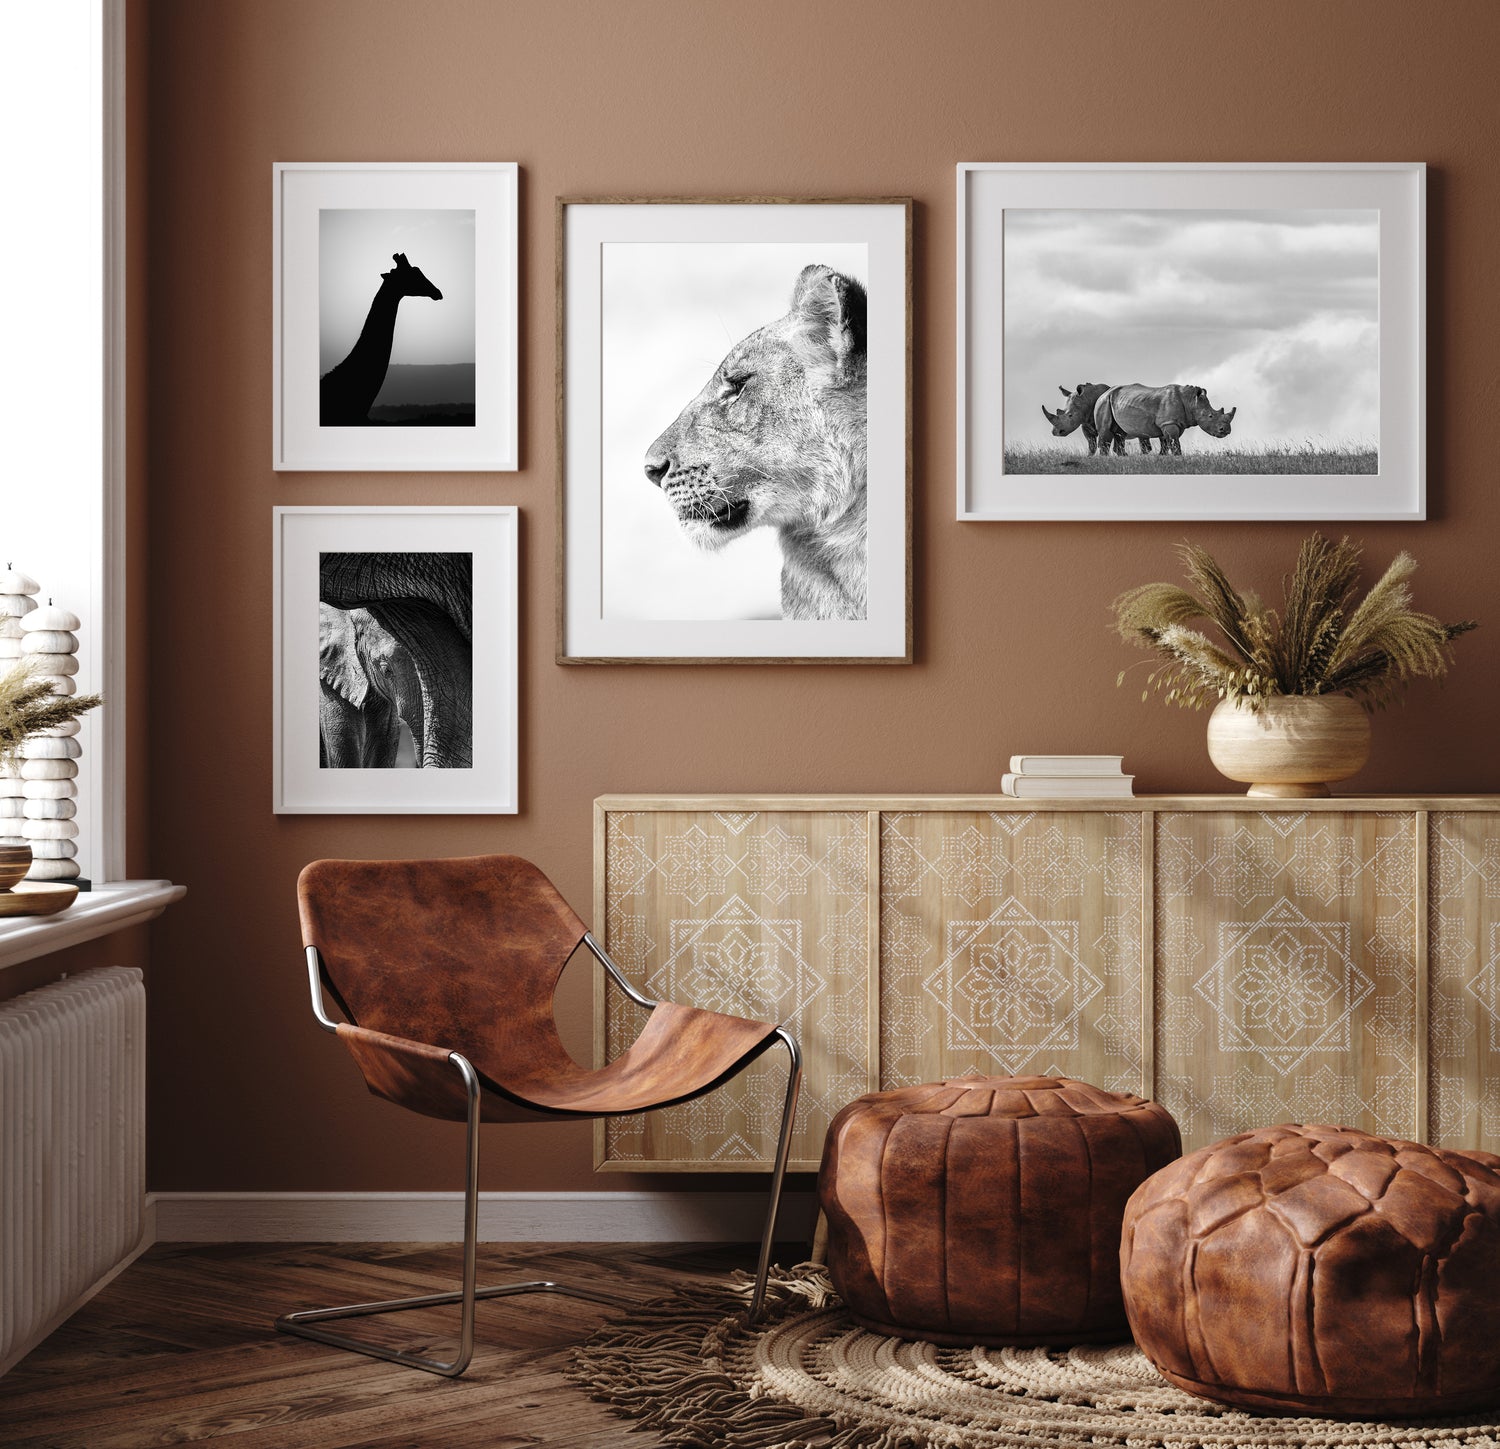 Photo Gallery Wall of Wildlife Prints in Monochrome to decorate your interior with exclusive limited edition fine art prints by Kim Paffen Photography